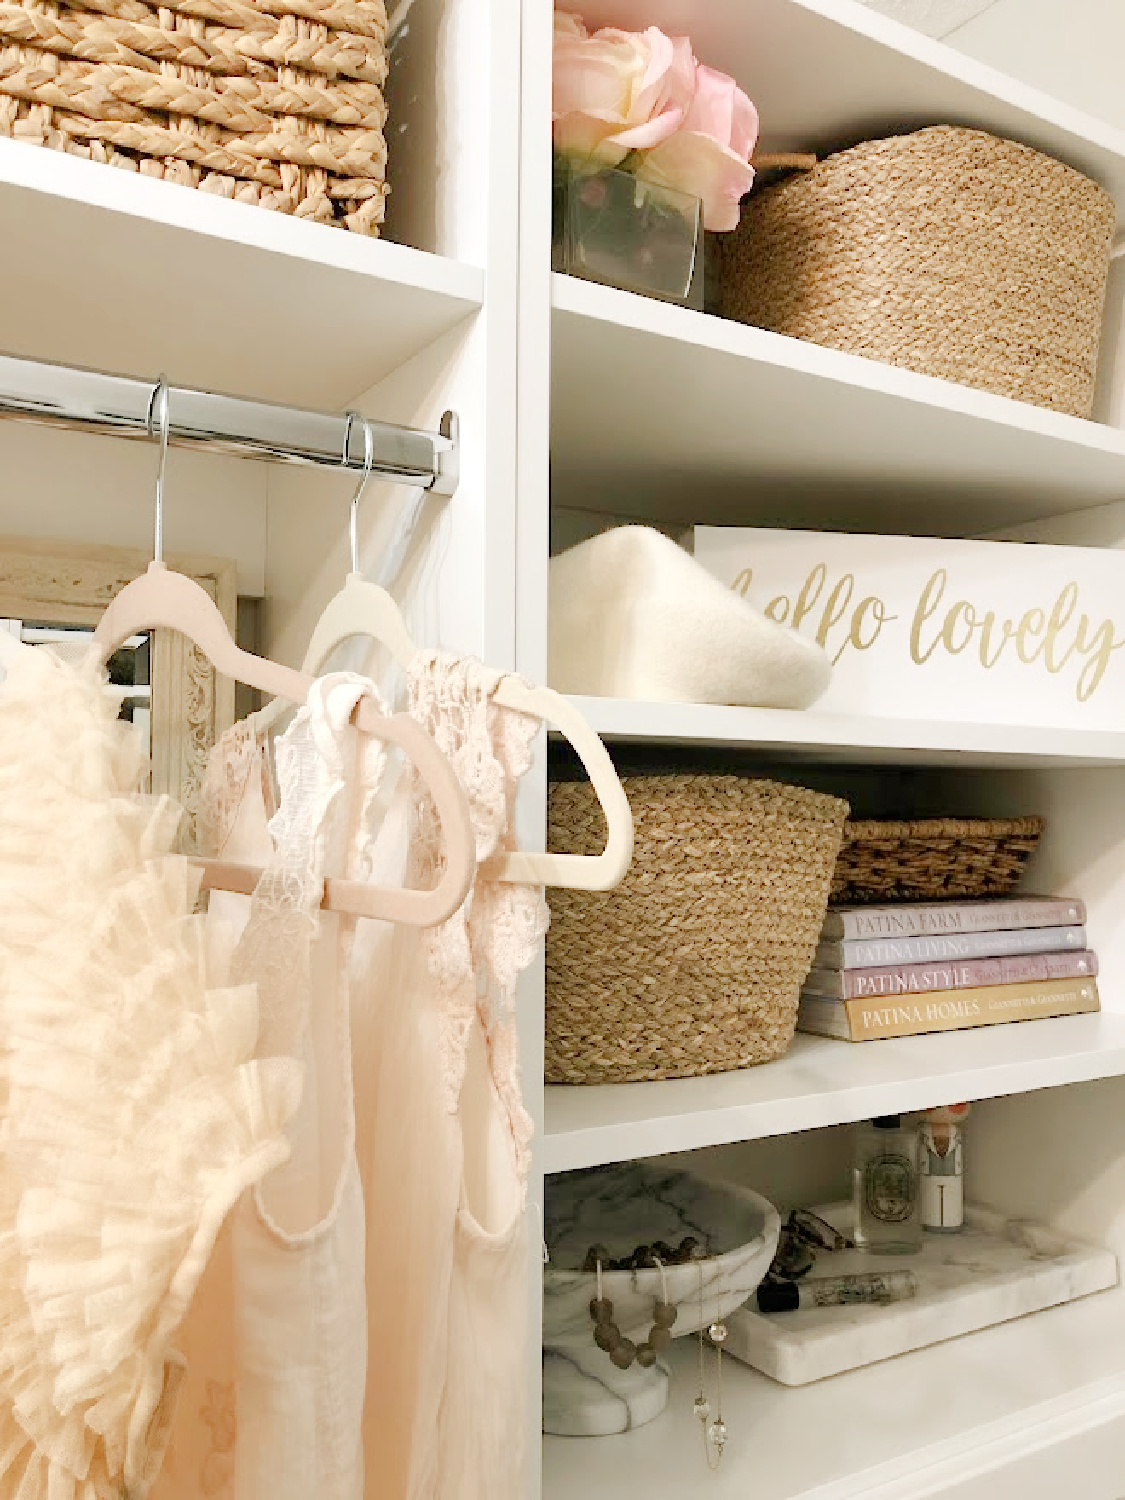 Hello Lovely's DIY custom closet makeover with Modular Closets - come see the before/after photos and learn how we whipped this space into shape! #diycloset #customclosetideas #closetmakeover #closetmodules #diyclosetmakeover